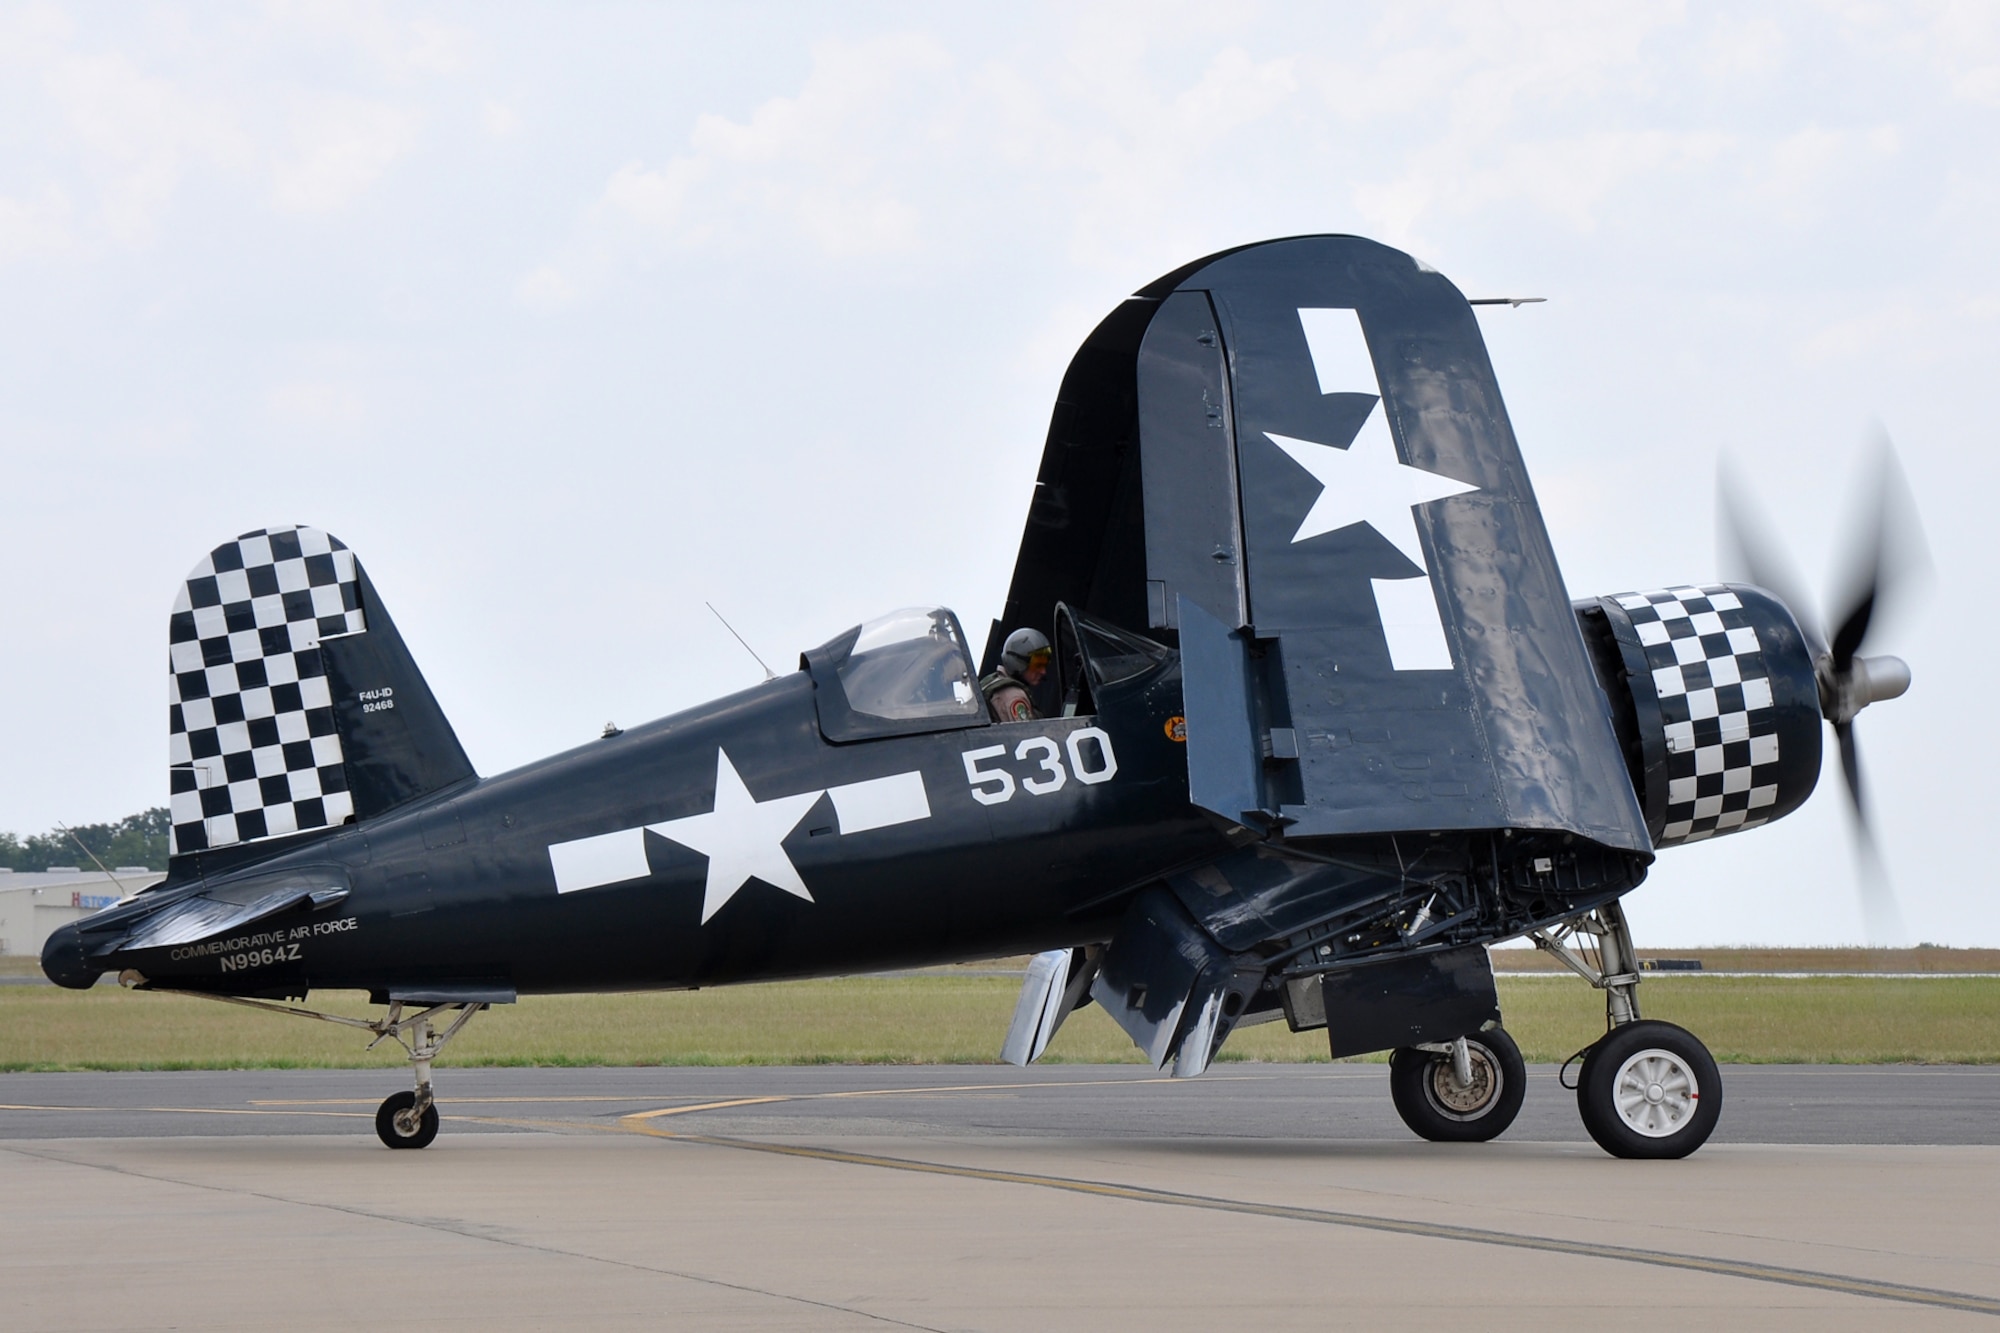 Chris Avery prepares his the F4U Corsair for takeoff during the “Wings Over Tyler Air Show” at Tyler Pounds Regional Airport, in Tyler, Texas, July 3, 2011. In addition to being a featured solo performer at the air show, Avery flew the Corsair in the “Tora! Tora! Tora!” performance, which recreates the 1941 attack on Pearl Harbor. Designed as a living history lesson, “Tora, Tora, Tora” is intended as a memorial to all the soldiers on both sides who gave their lives for their countries. Avery is a former U.S. Marine Corps Gunnery Sgt. and Scout Sniper. He plans to fly about 16 air shows this year. (U.S. Air Force photo/Tech. Sgt. Jeff Walston)